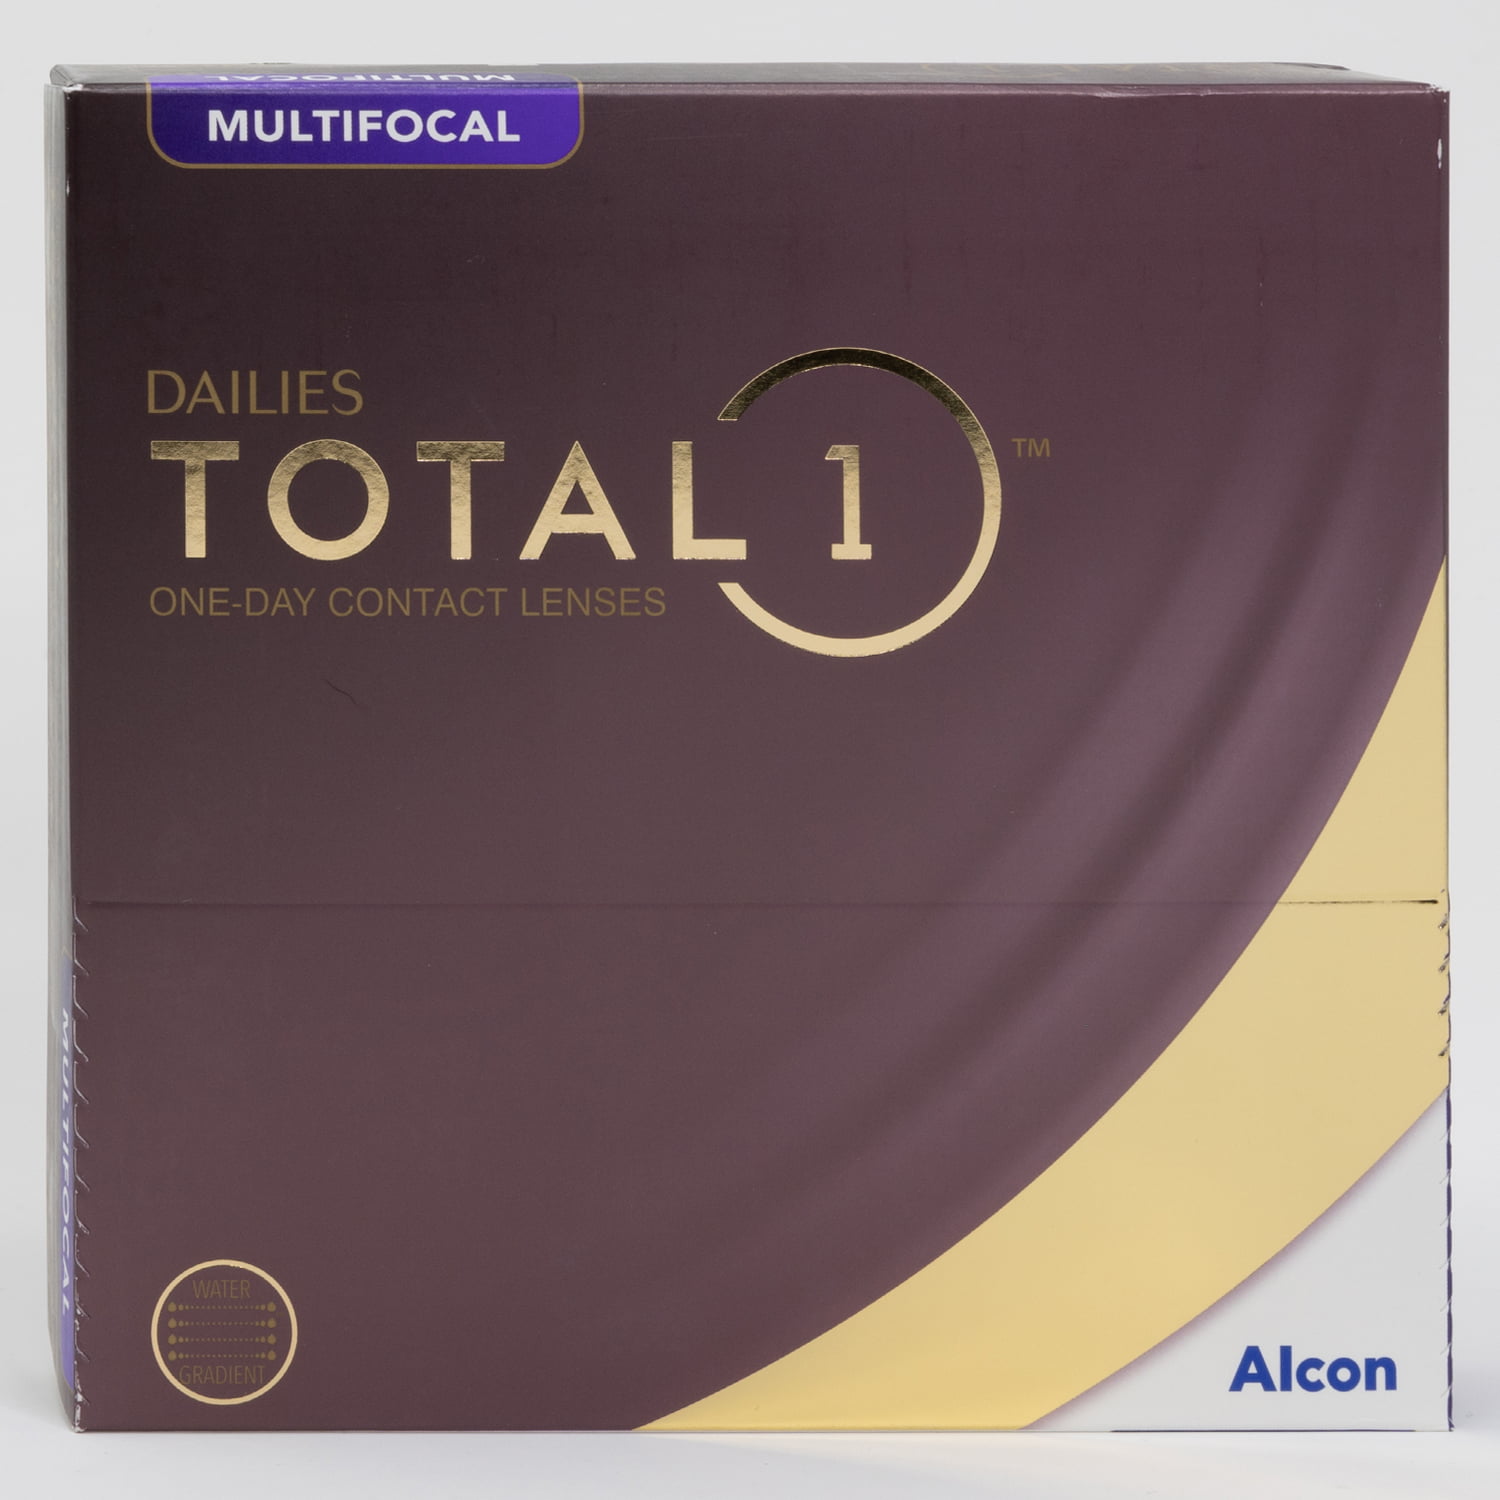 dailies-total1-multifocal-90-pack-deliver-contacts